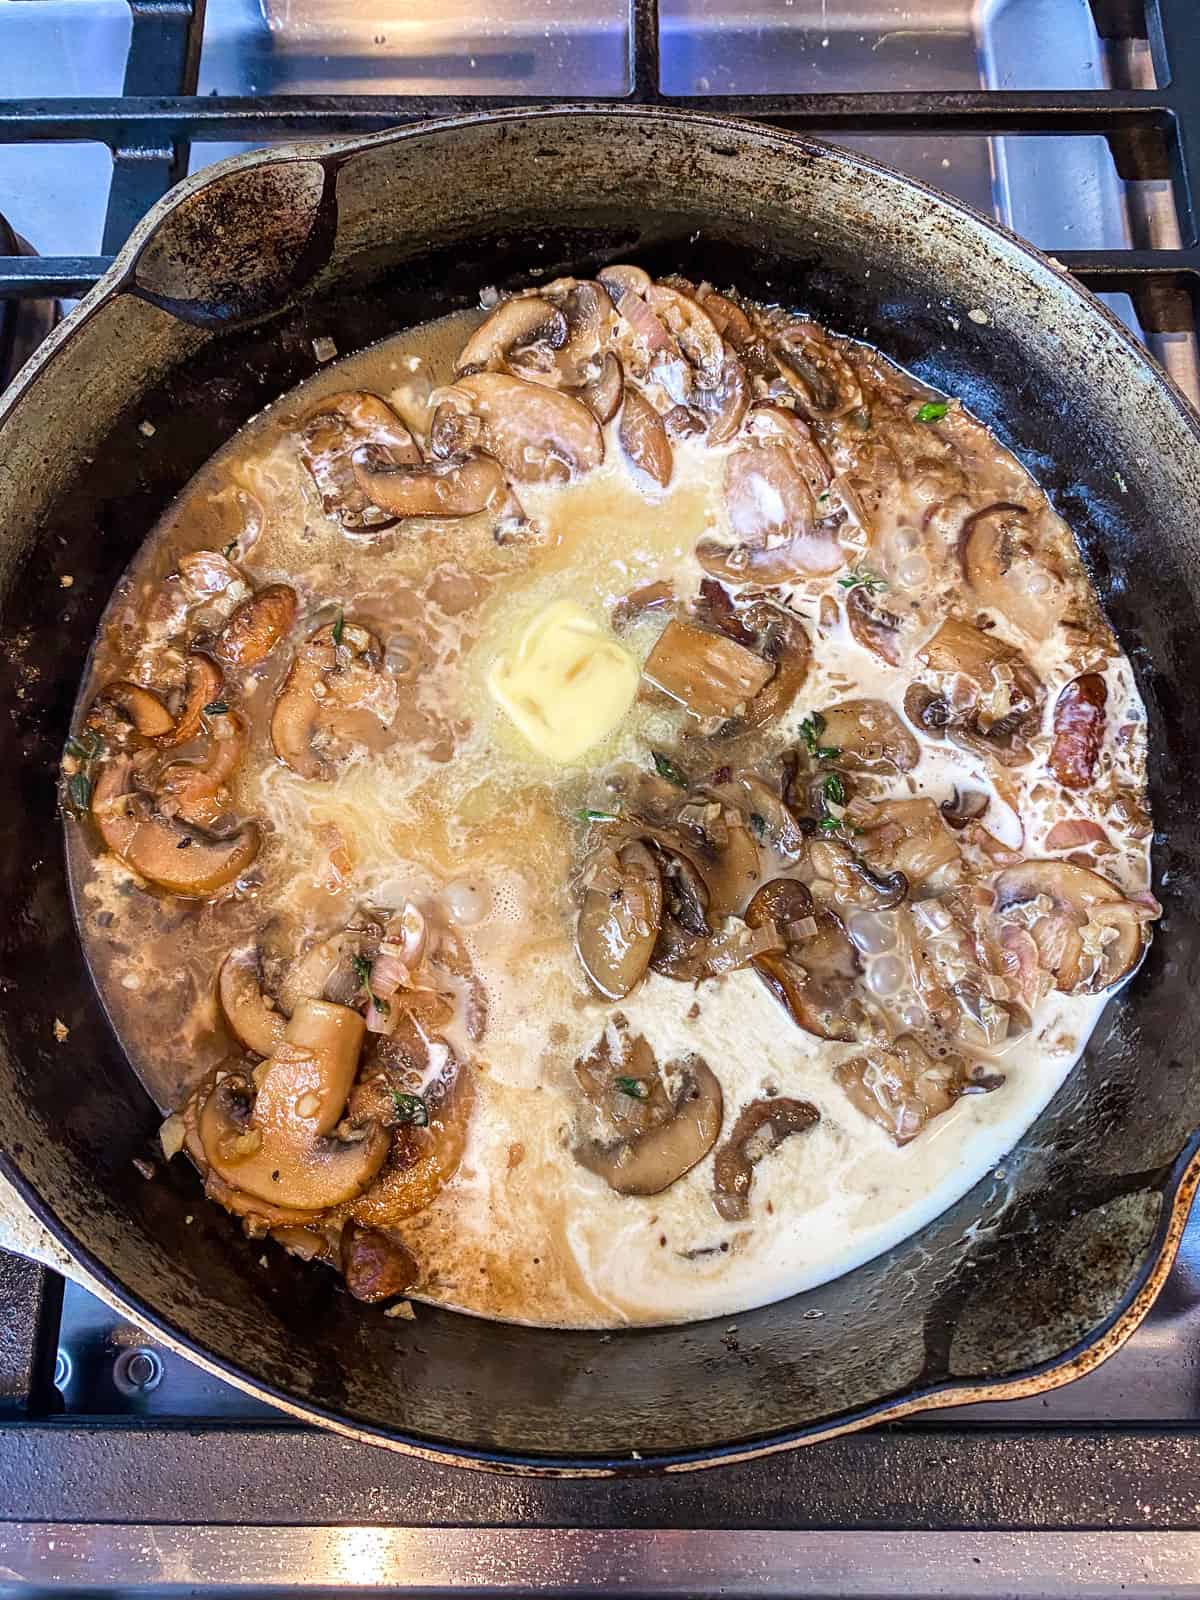 Add cream and butter to the sautéed mushrooms.